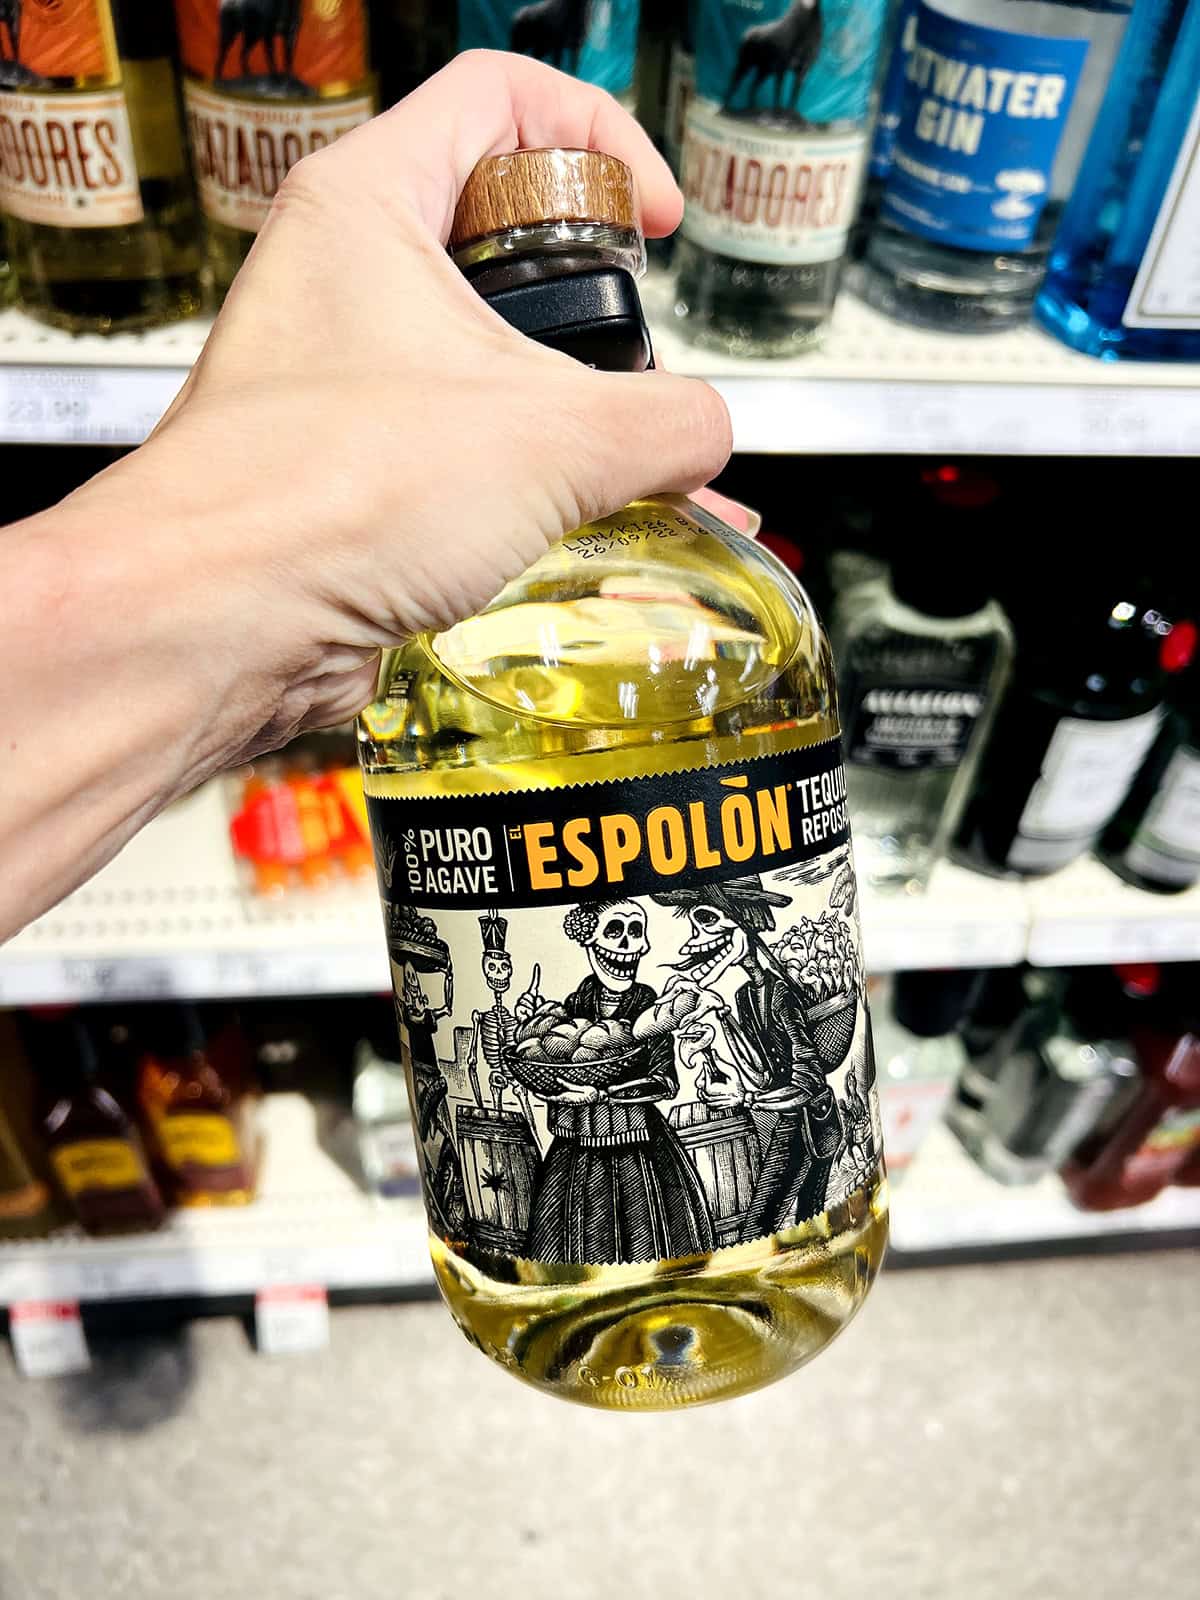 hand holding espolon tequila bottle in grocery store aisle